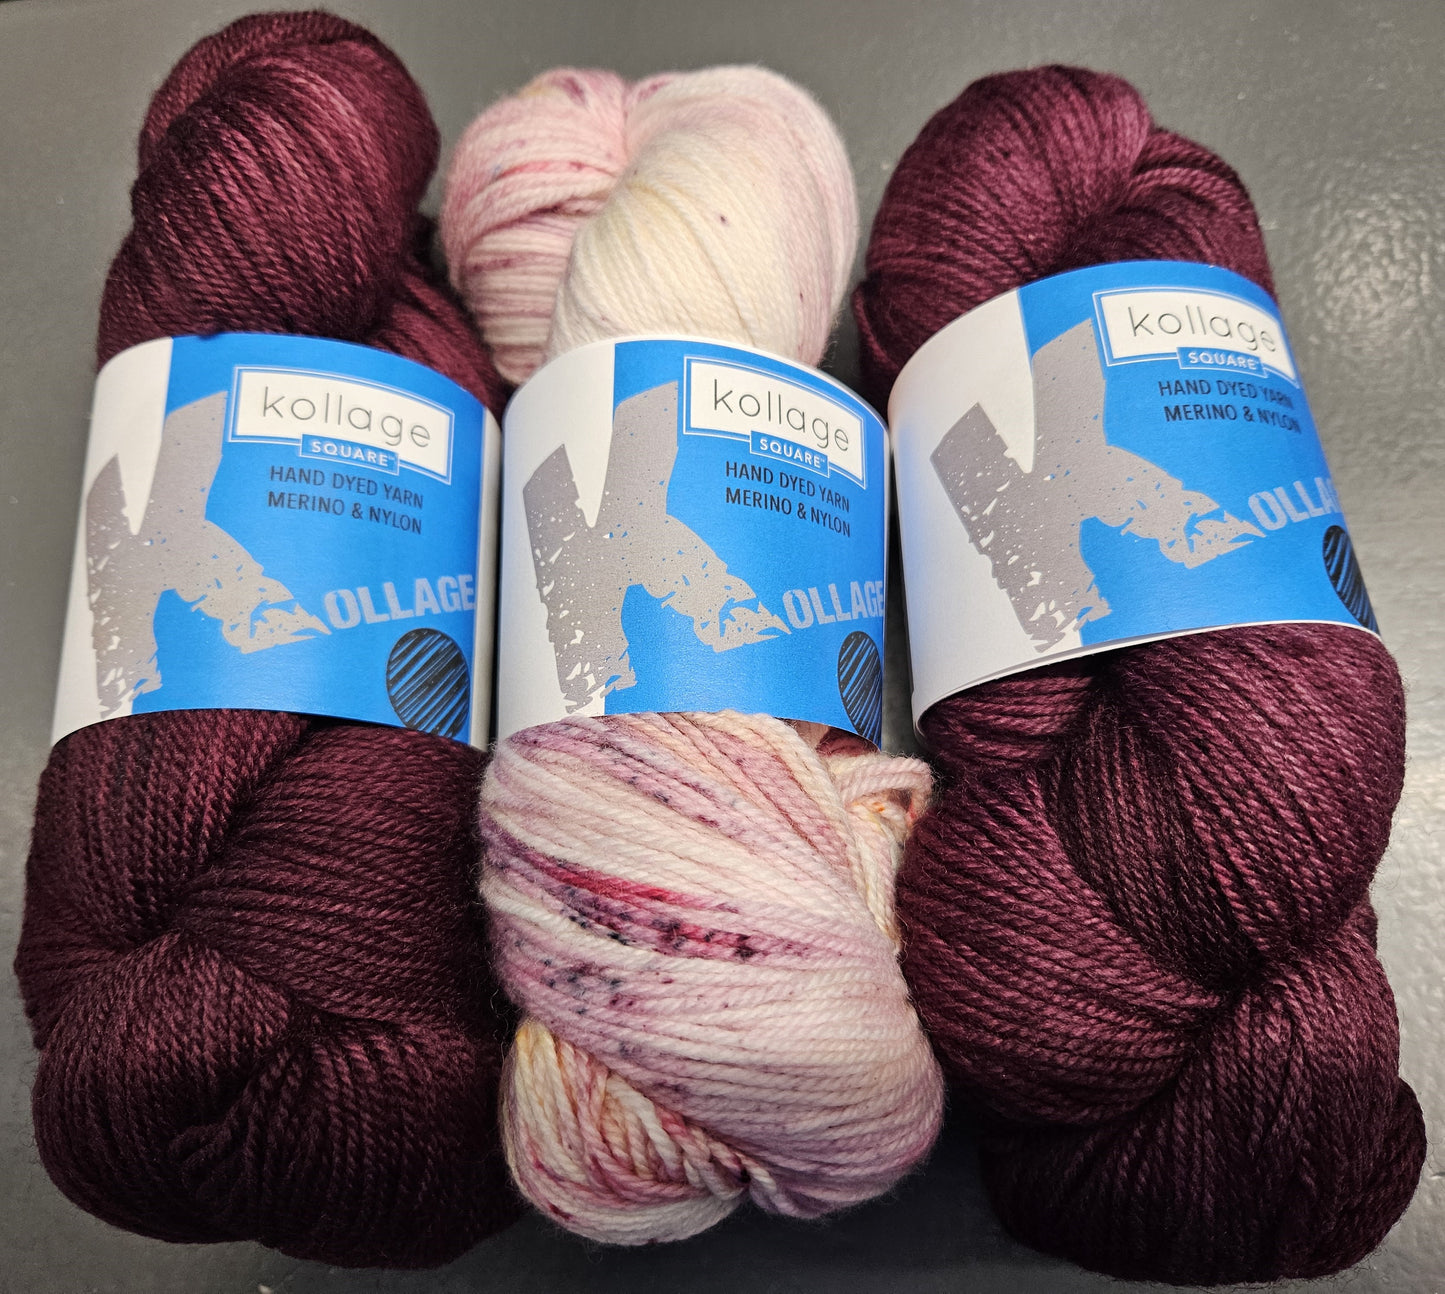 kollage SQUARE - Hand Dyed Yarn -  Reds